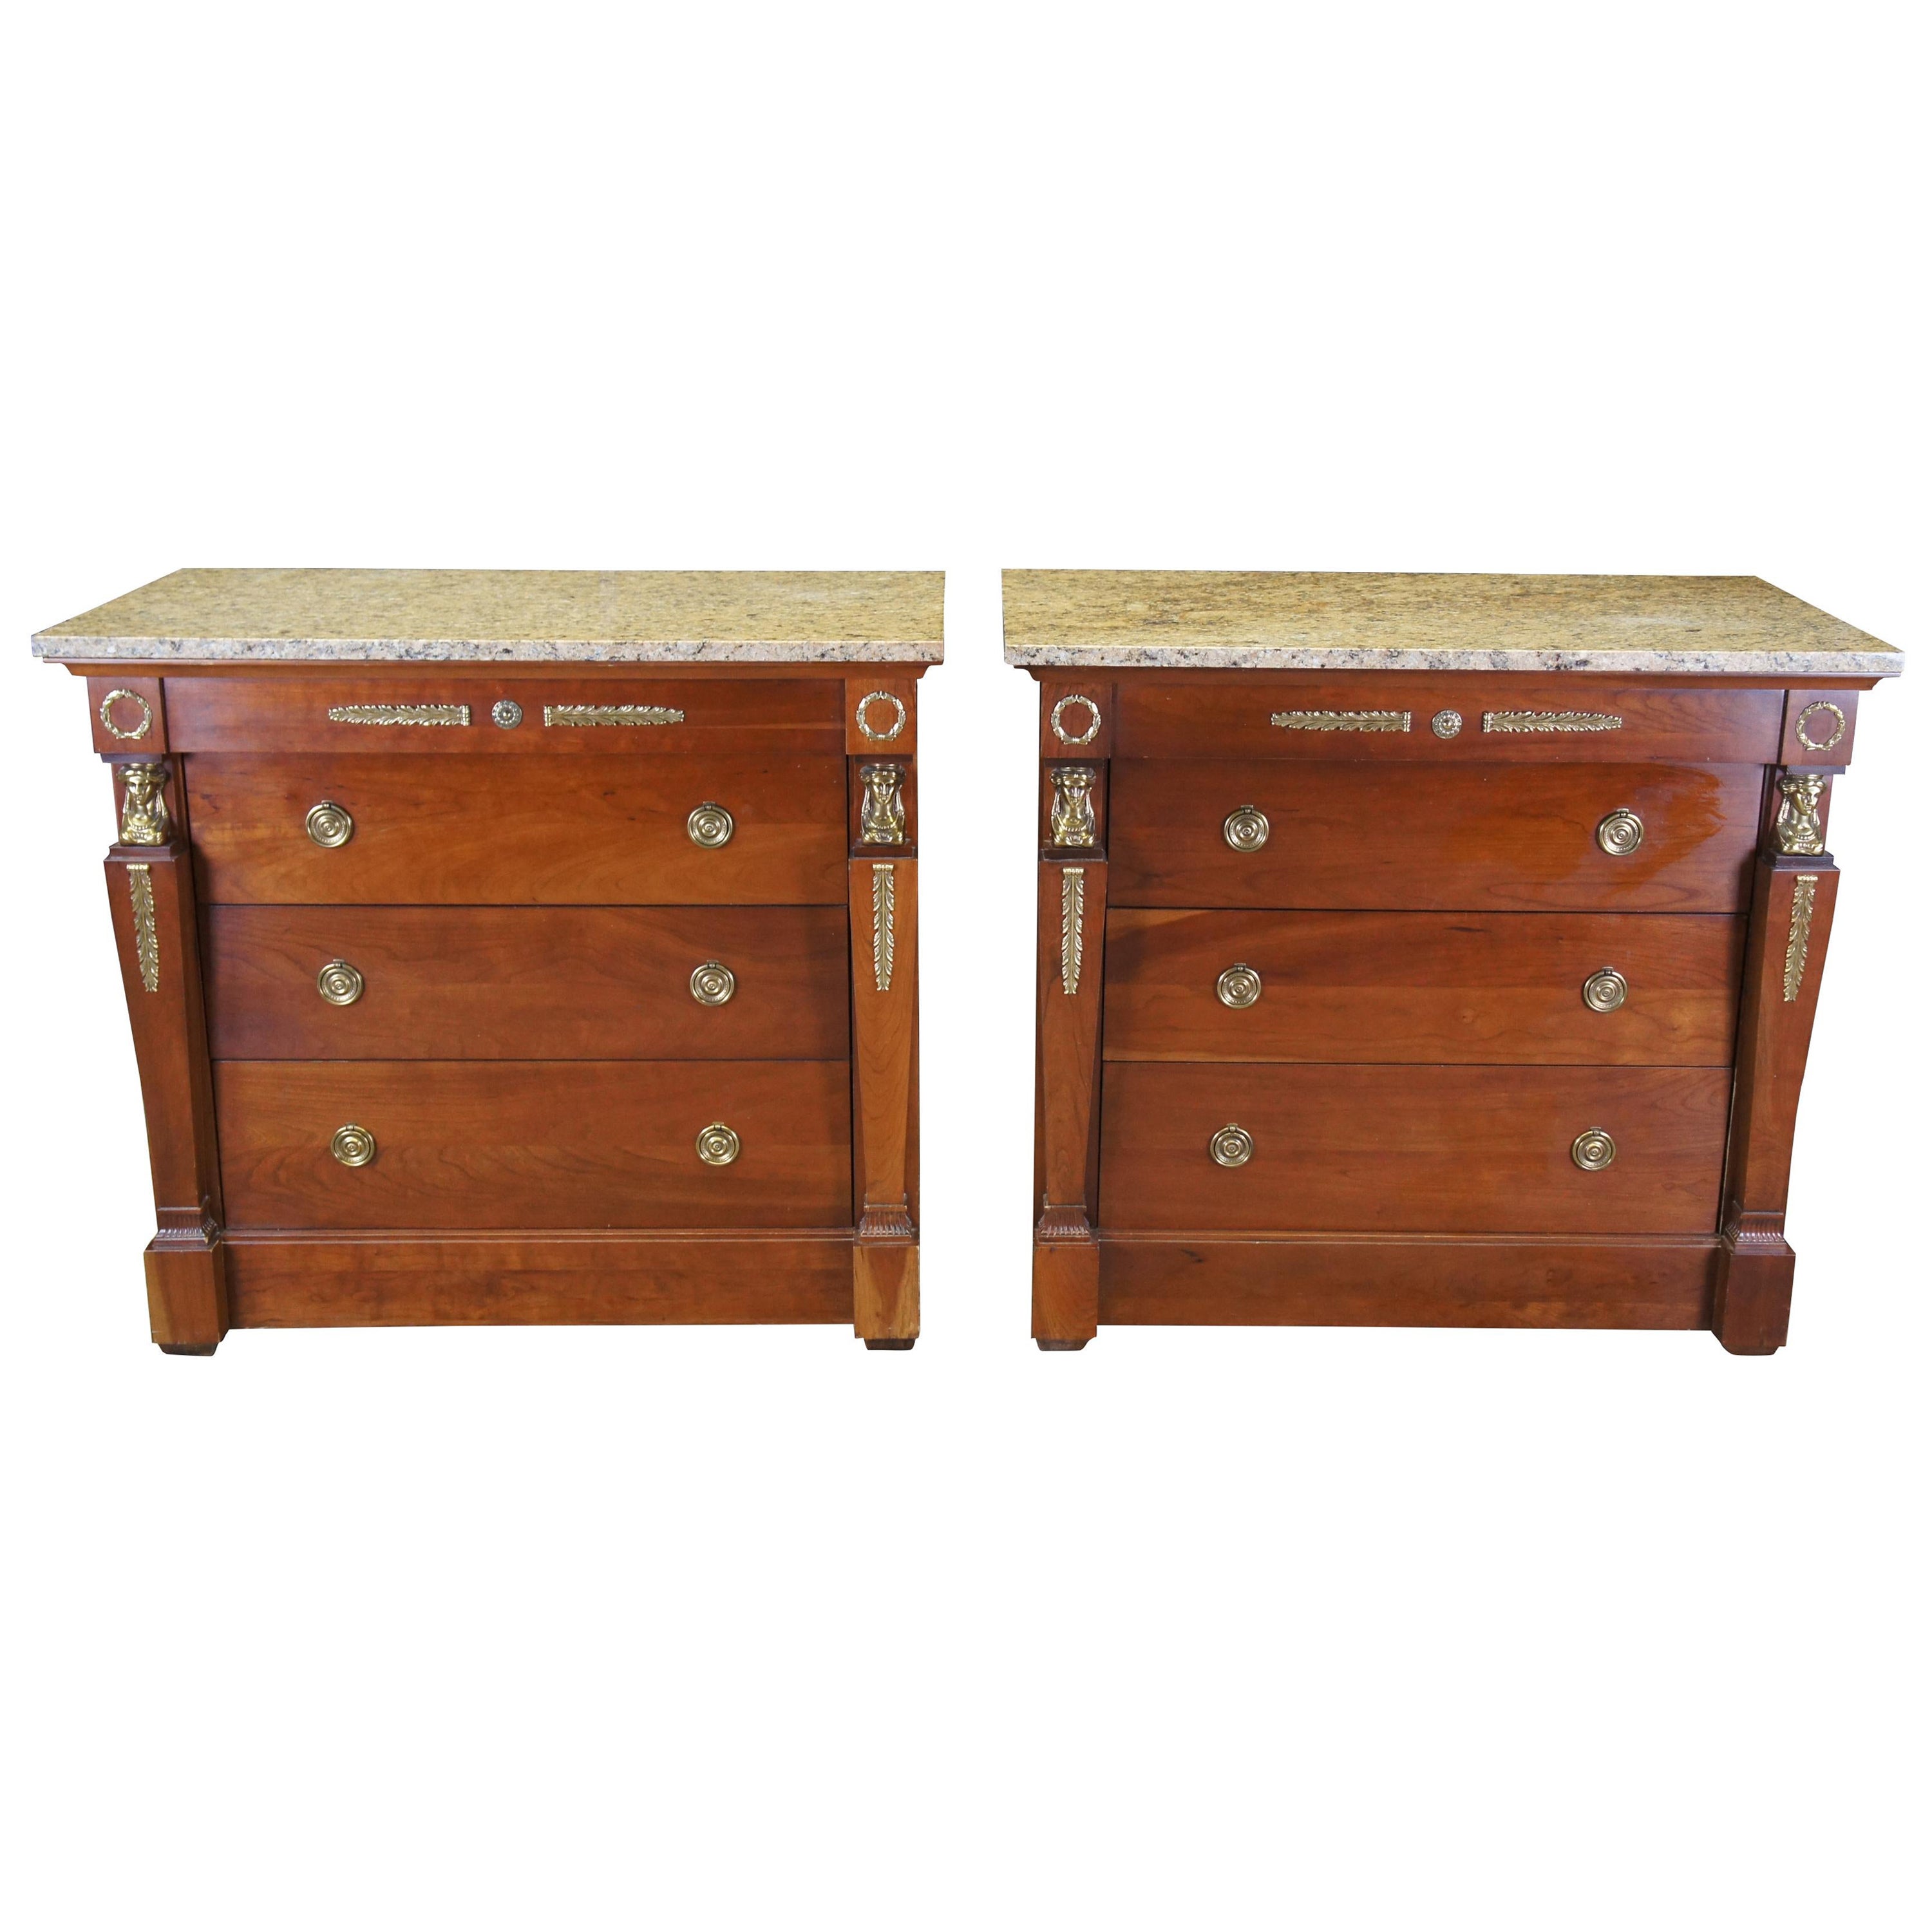 2 Commodes de nuit Harden French Empire Egyptian Revive Cherry Marble Commodes Chest en vente